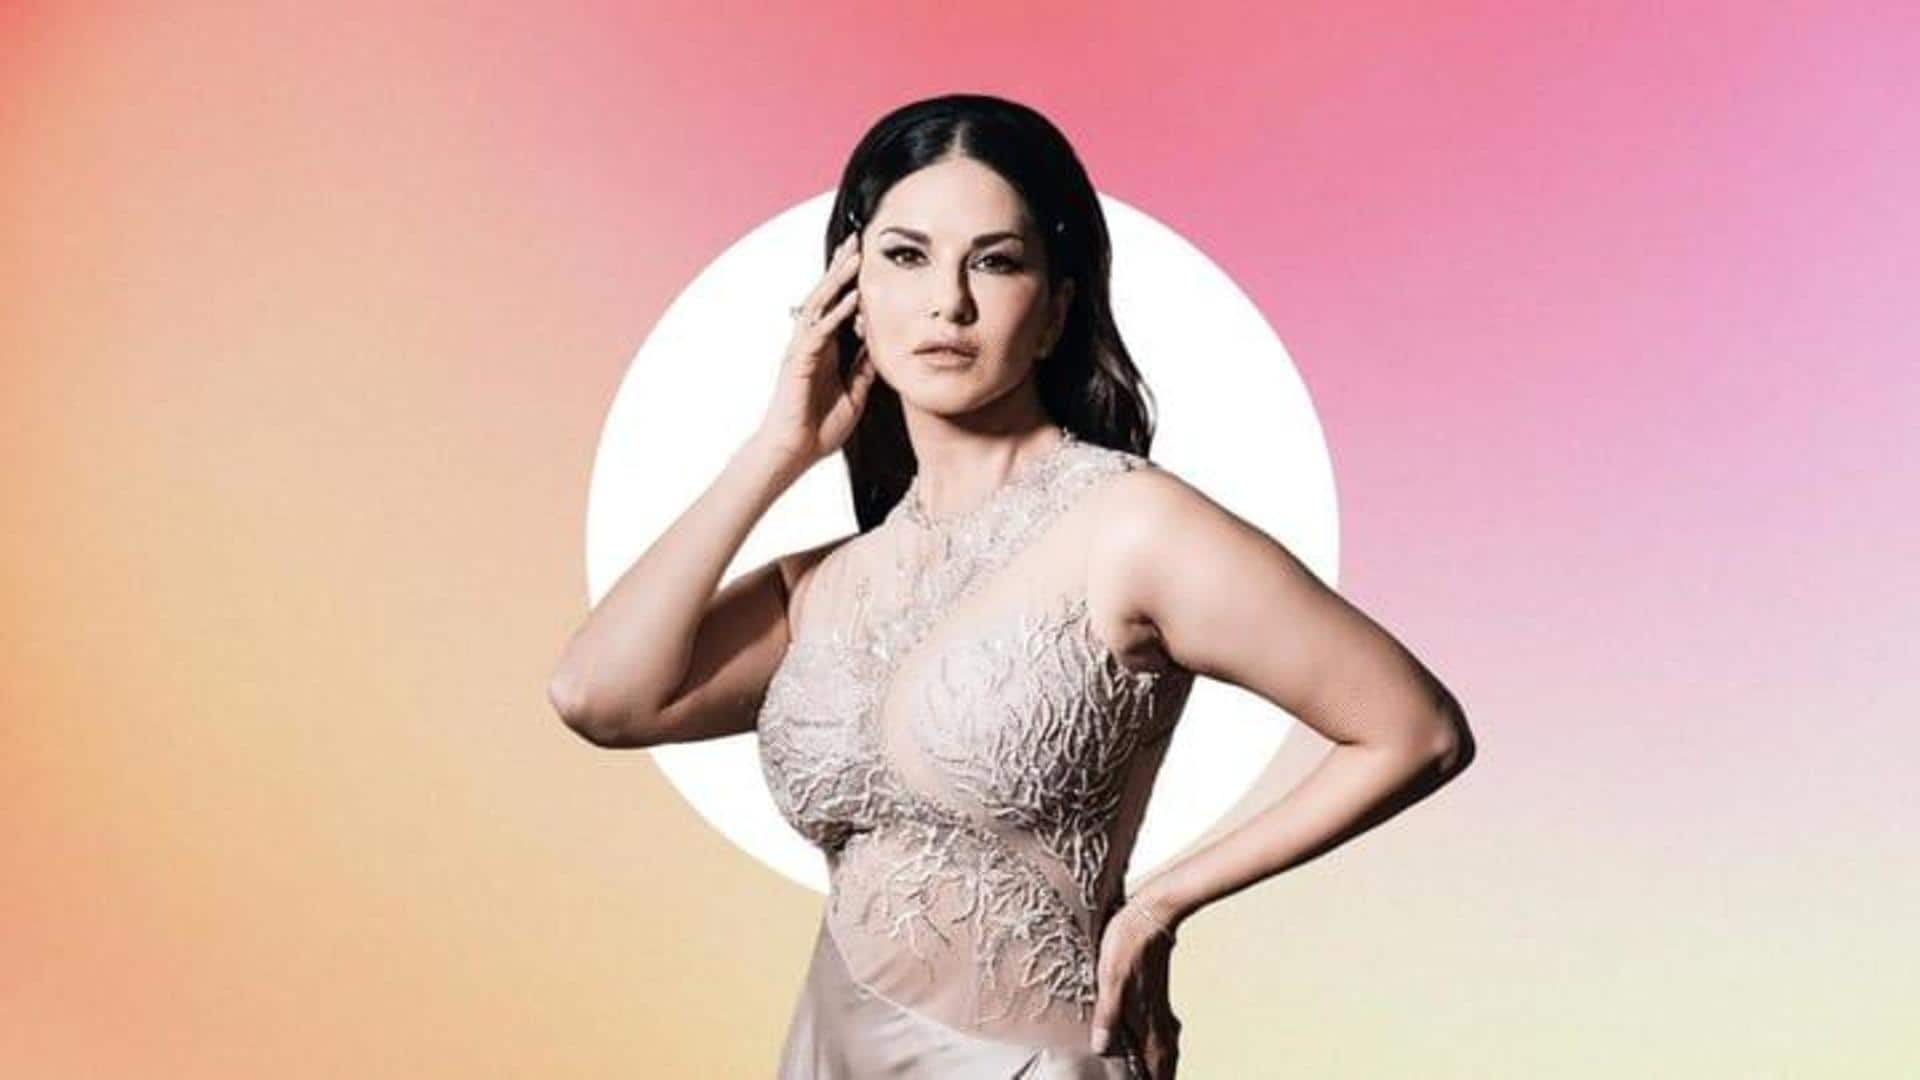 Sunny Leone speaks about dropping 'adult entertainment industry actor' tag